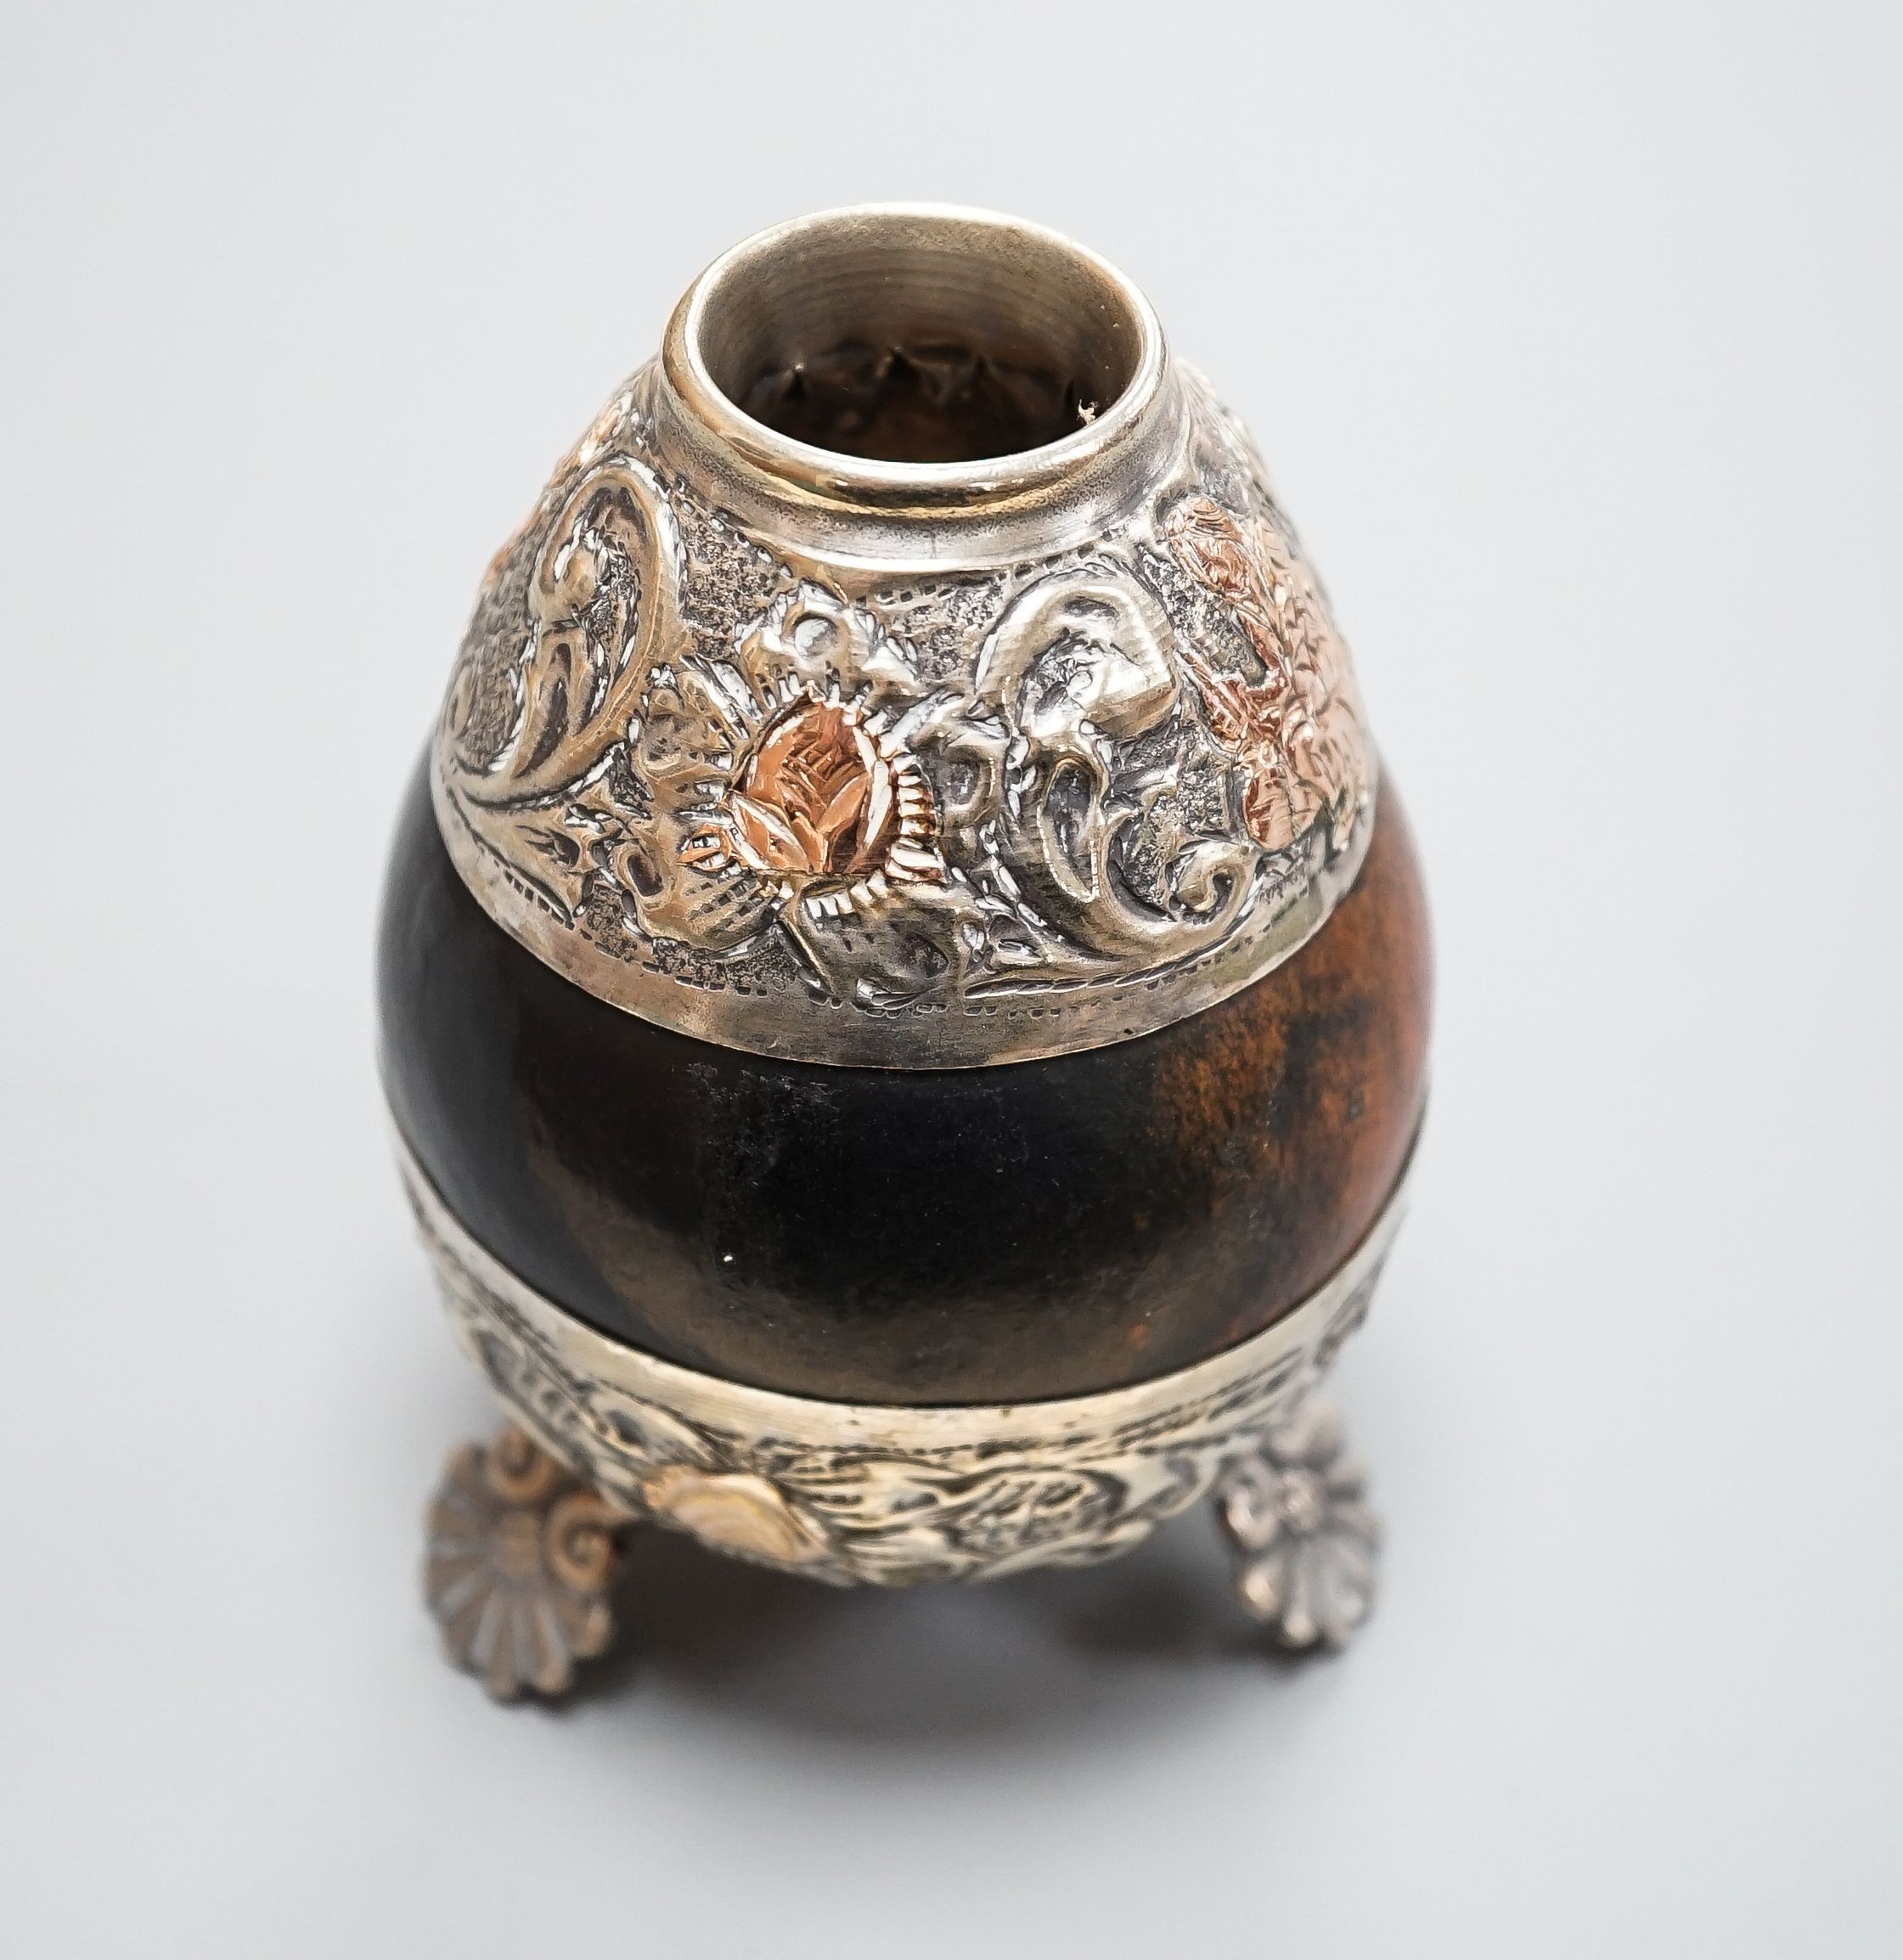 A 20th century maté cup gourd with white and yellow metal repoussé decoration, height height 10cm.